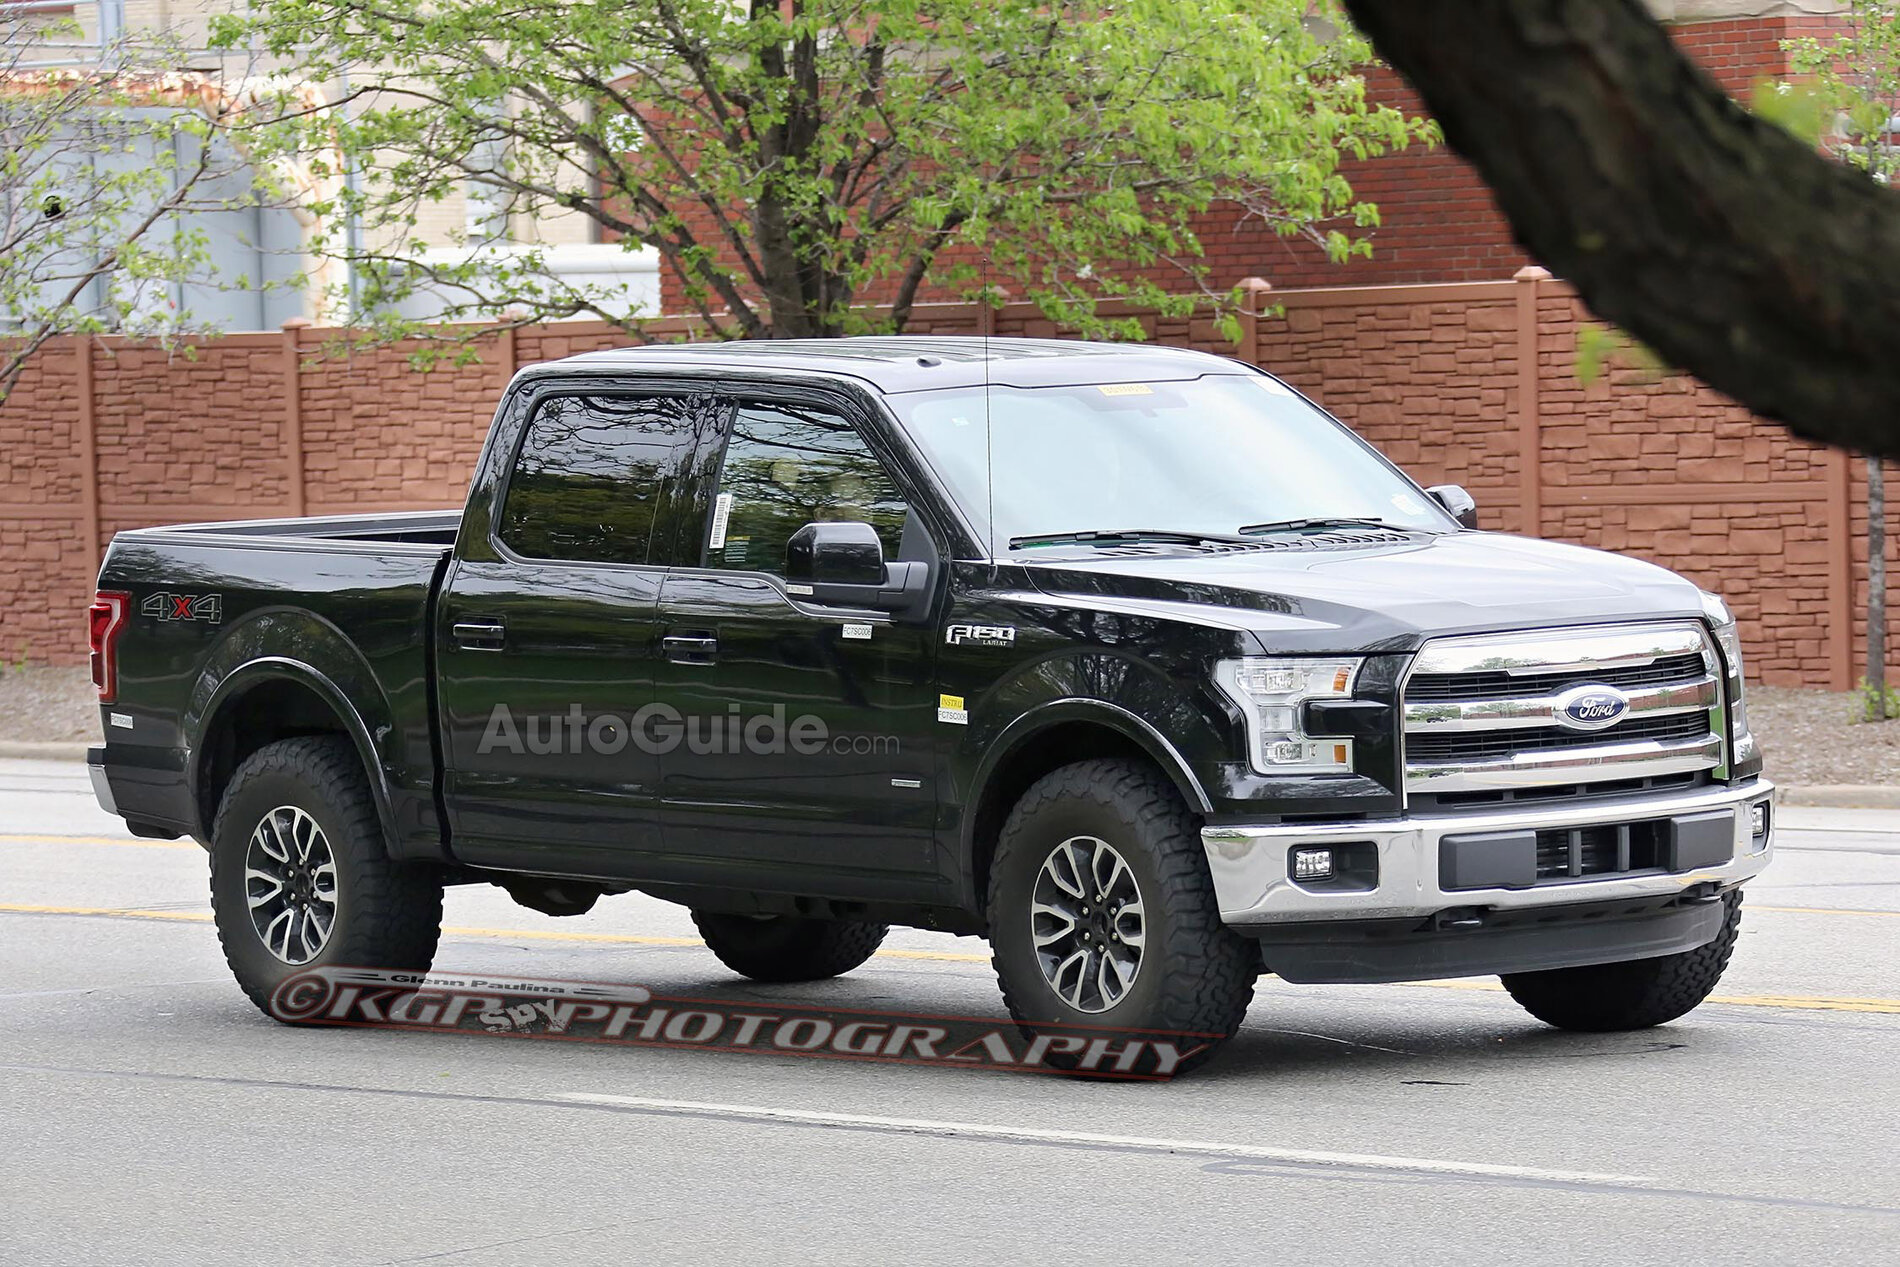 S650 Mustang S650 is out there somewhere, isn't she? Ford-F-150-Mule-Spy-Photo-11